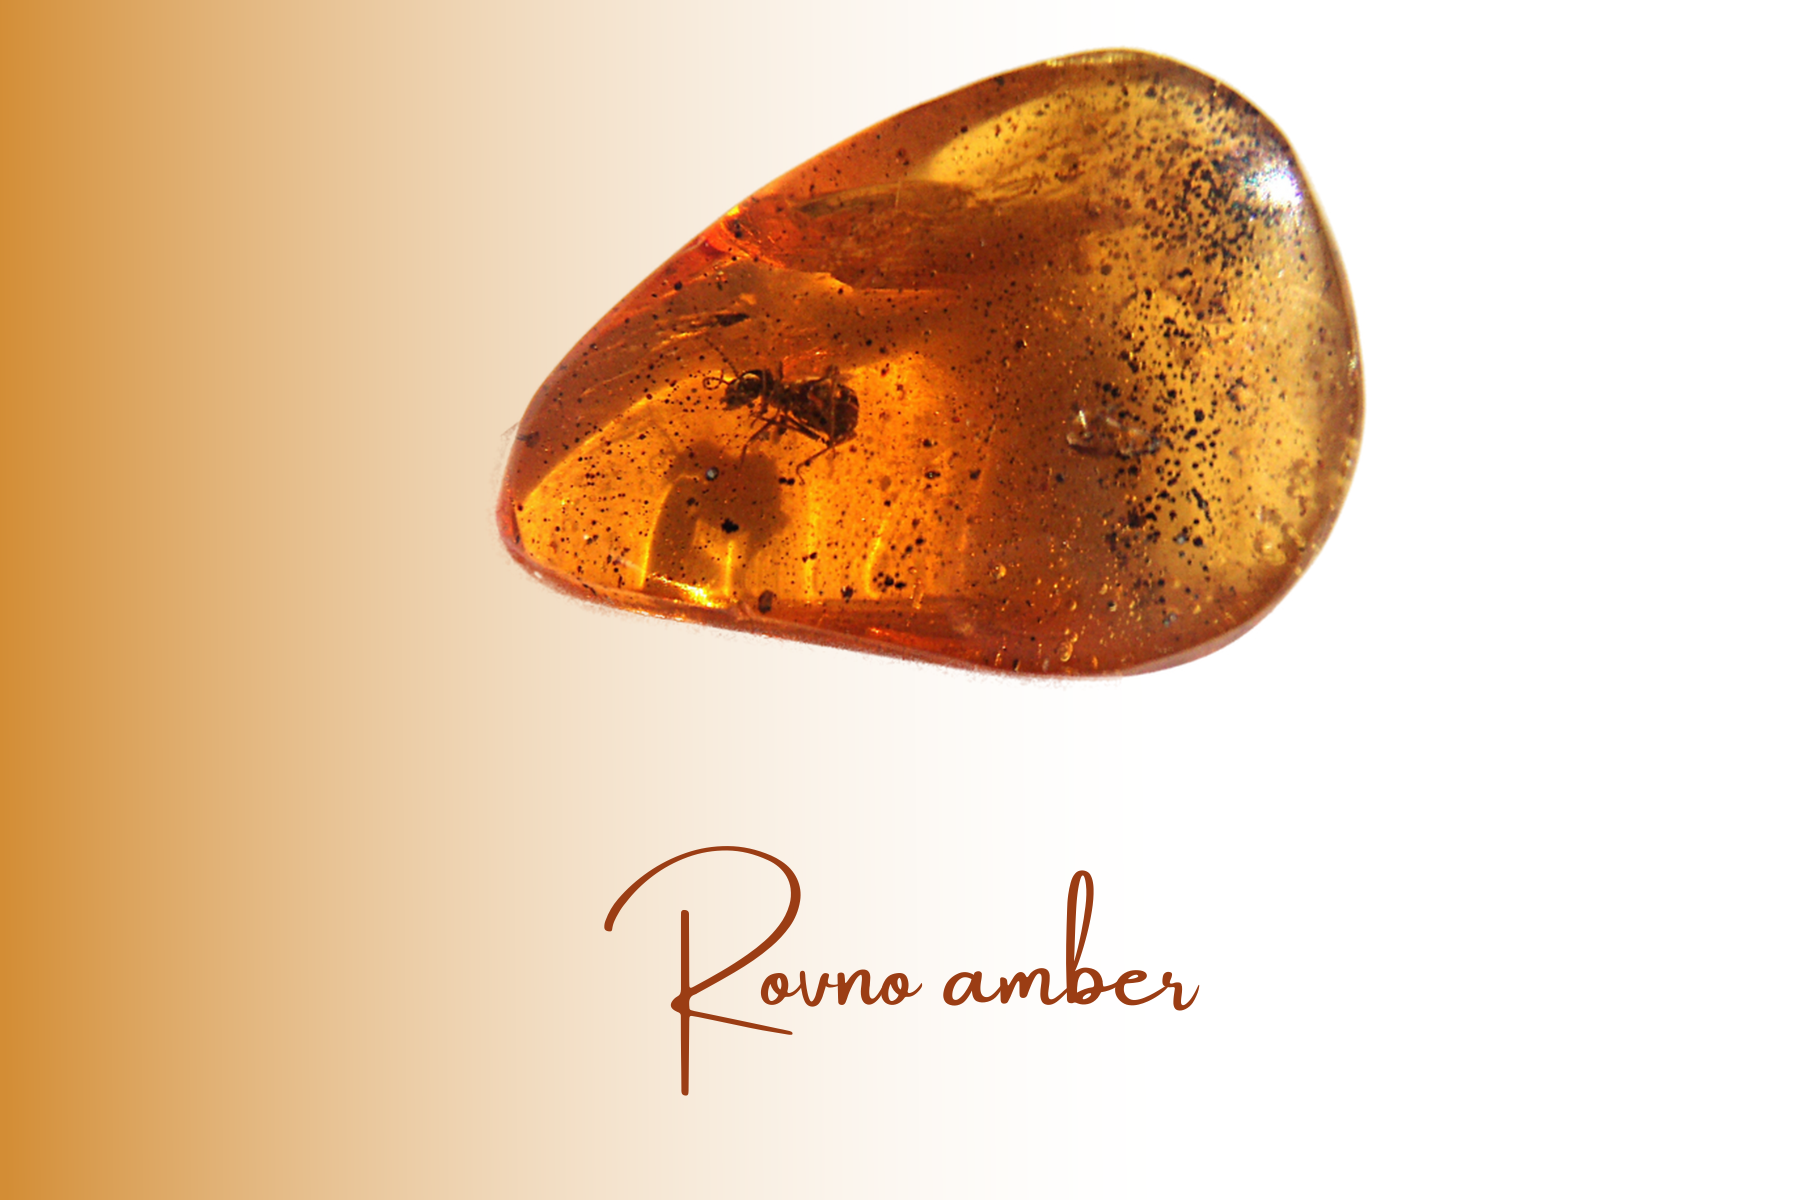 Triangular yellow-orange Rovno amber with insect inside